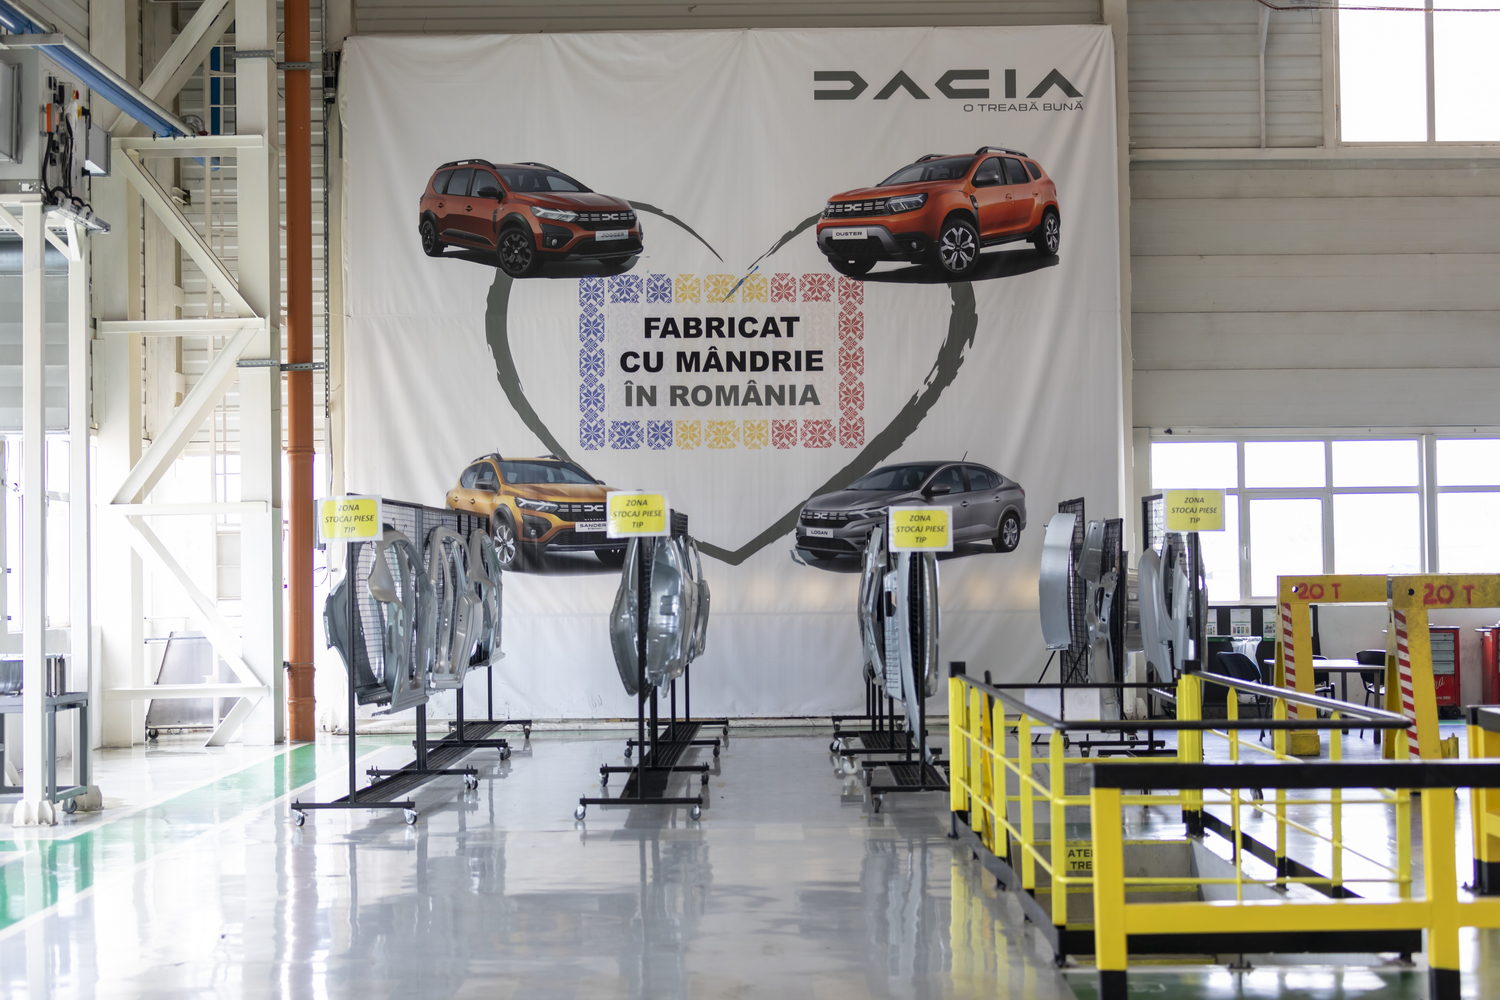 How will Dacia design cars to be affordable?